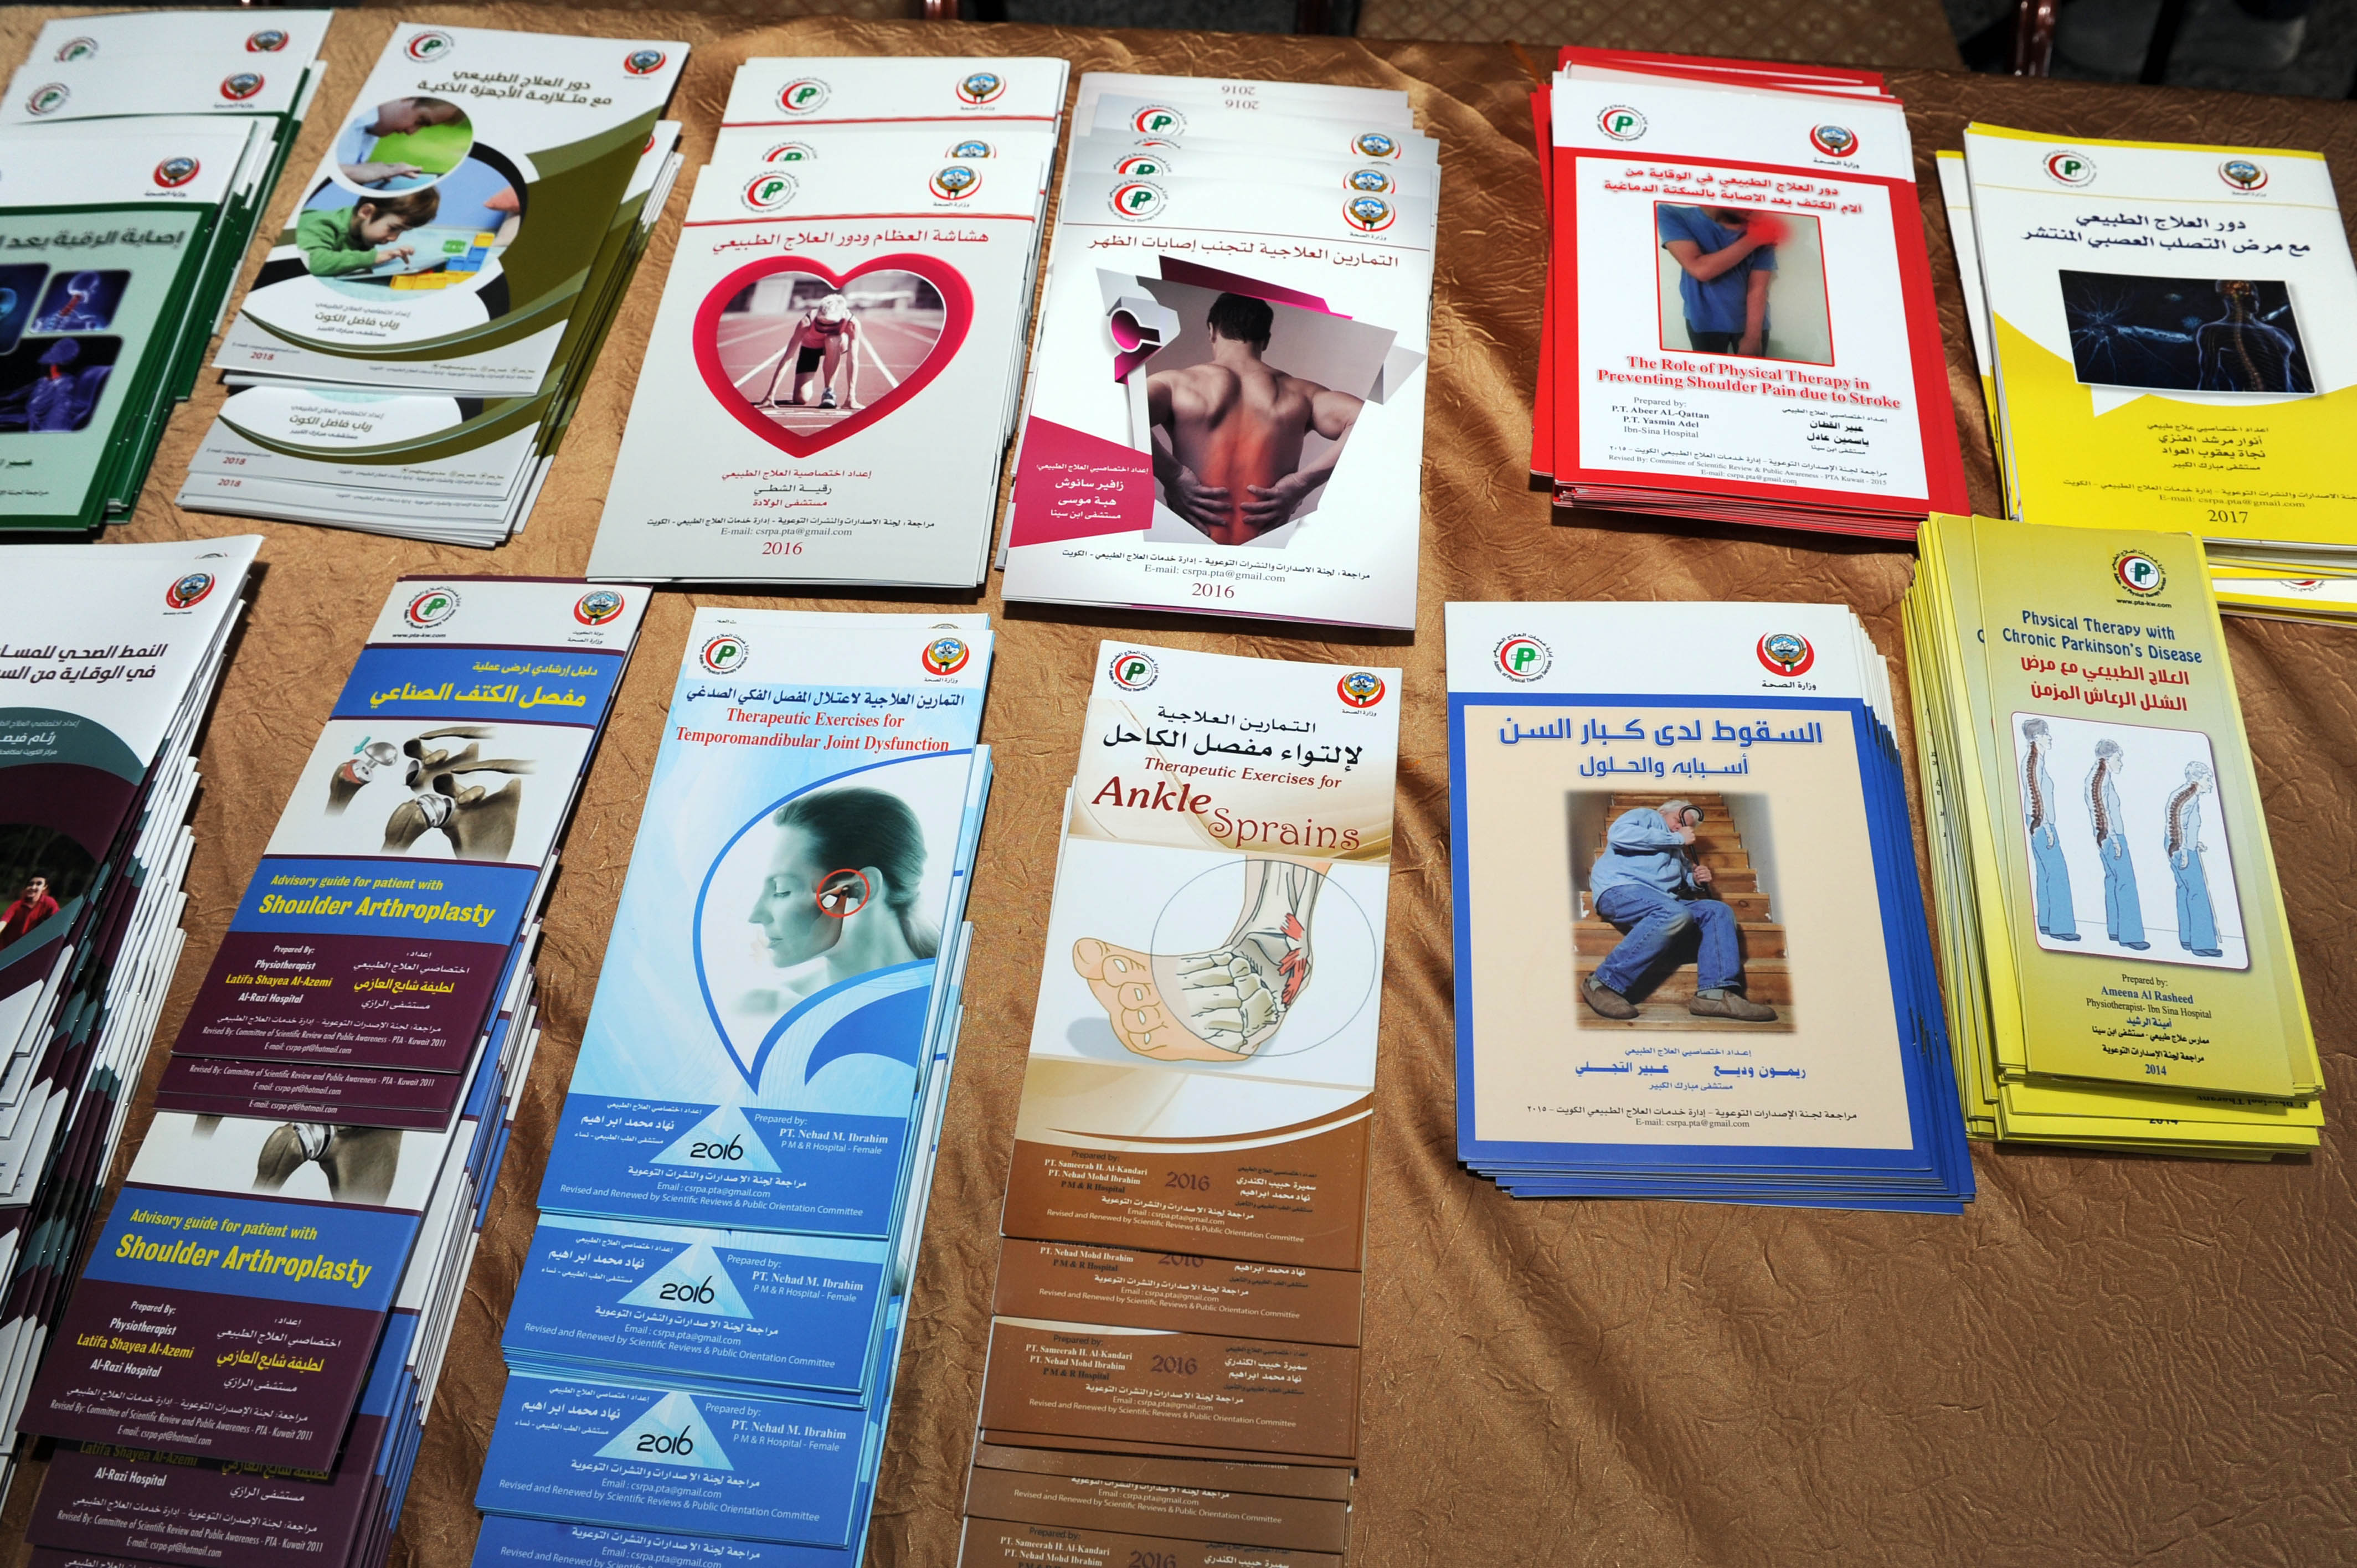  "Physical Therapy and Mental Health" brochures